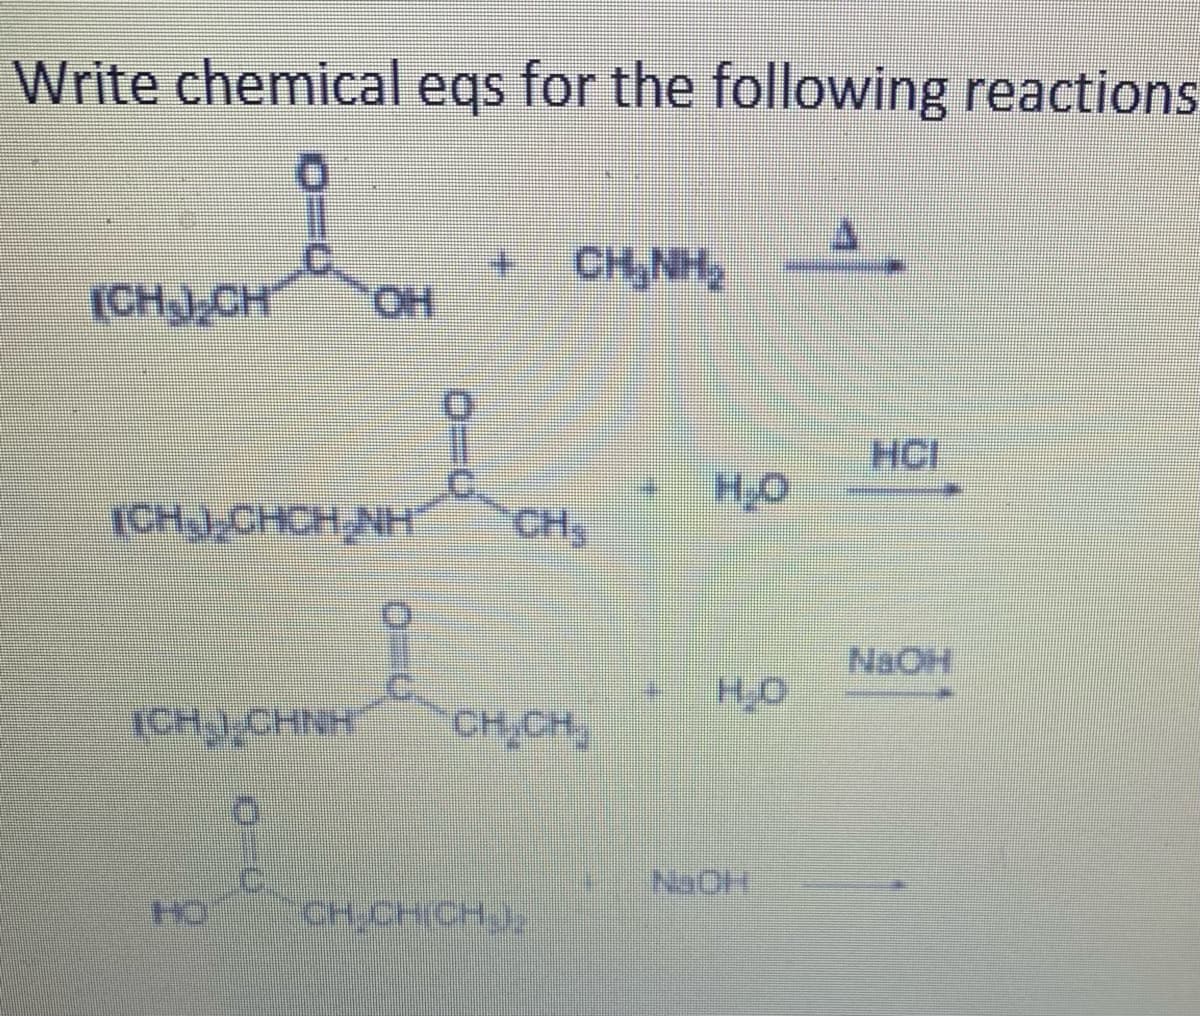 Write chemical egs for the following reactions
CH,NH,
(CHJ,CH
HO.
HCI
H,O
ICH3 CHCH NH
CHS
NaOH
H,O
CHJ,CH
NaOH
